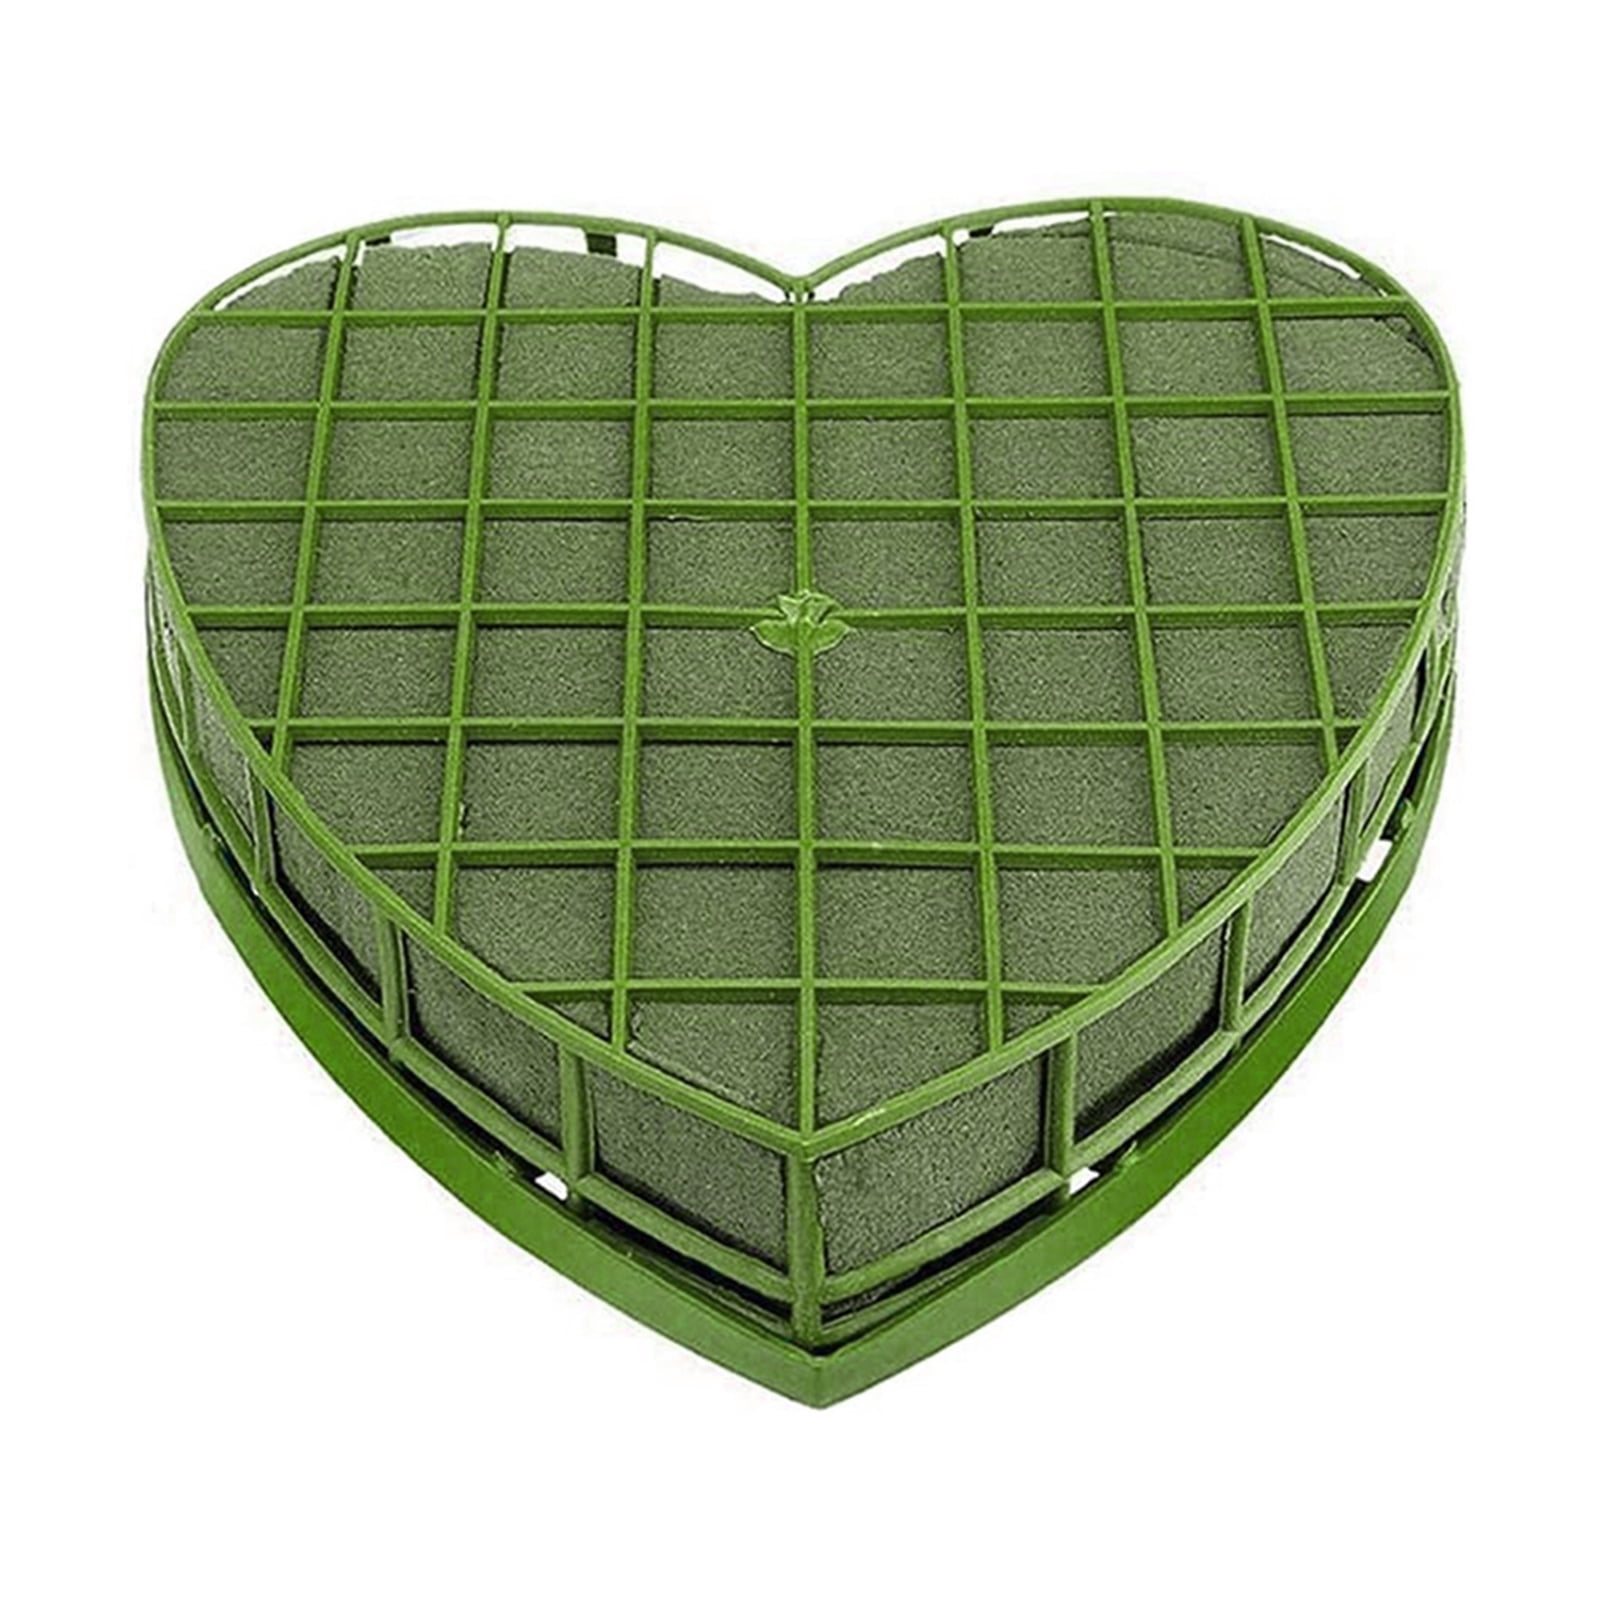 SIEYIO Wedding Car Heart Shape Flower Foam Cage with Suction Cup Green ...